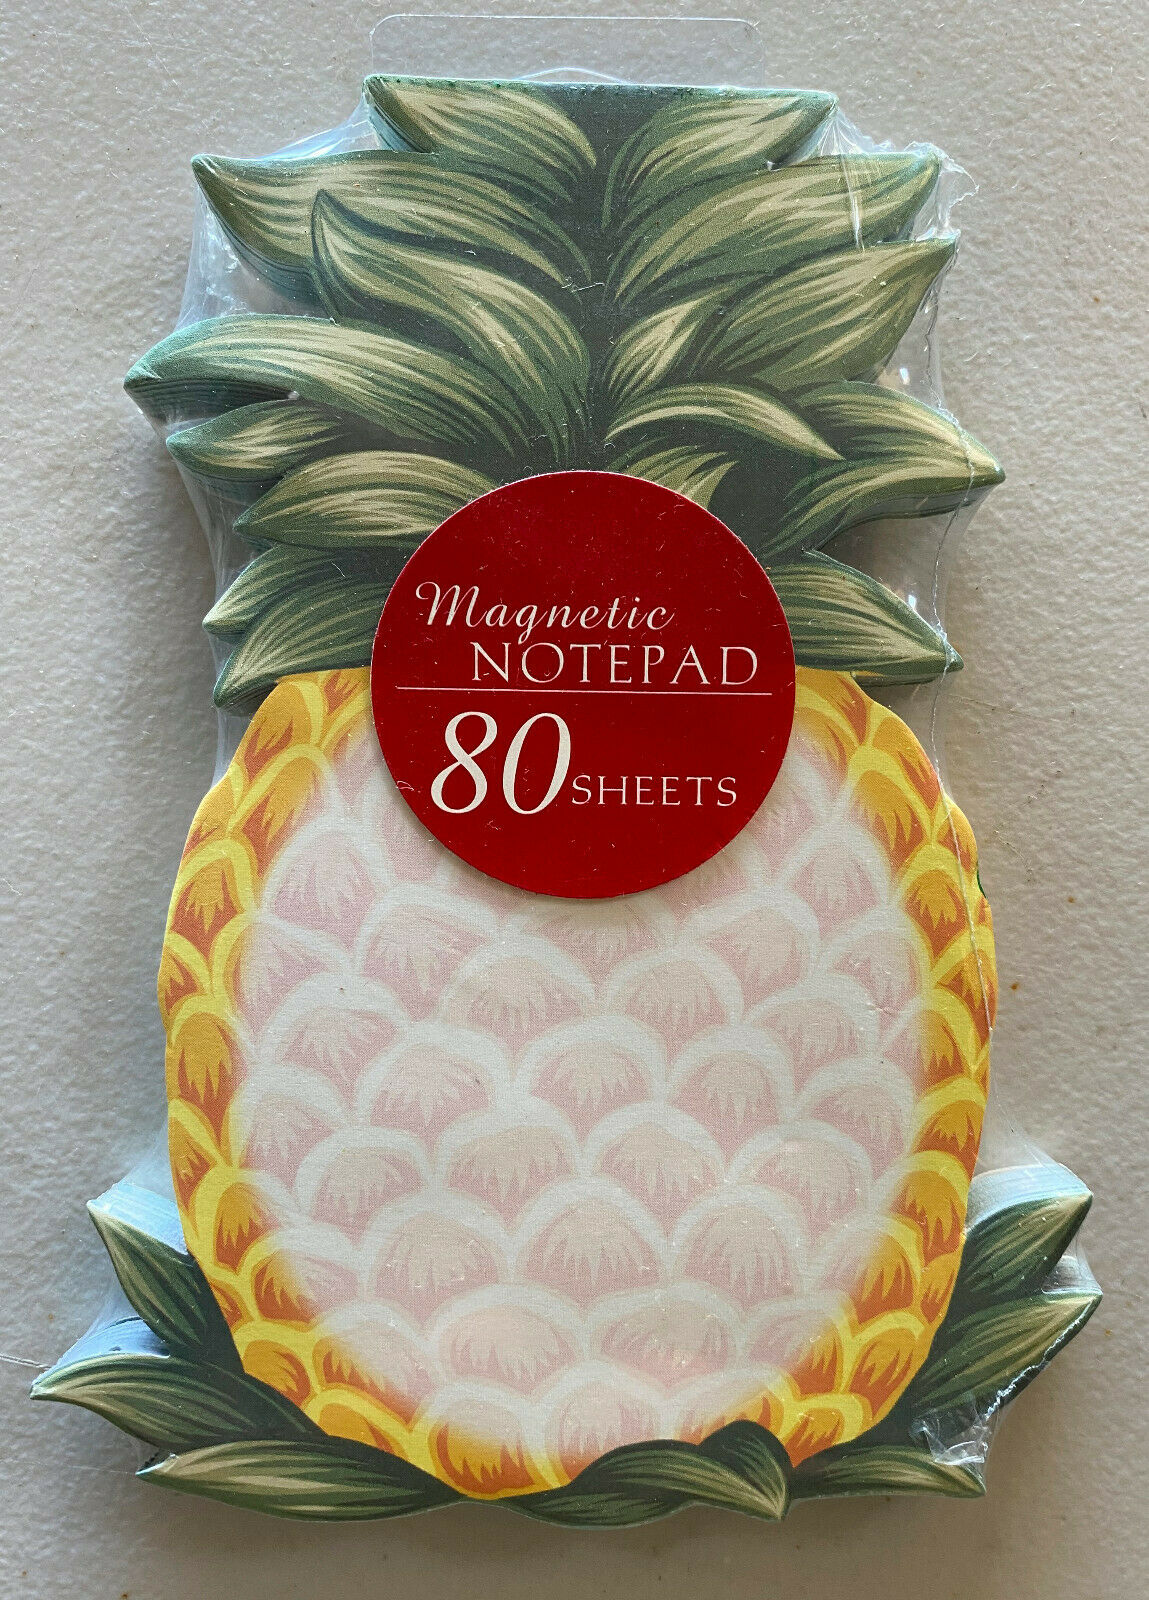 Island Heritage Pineapple Magnetic Notepad 80 Sheets